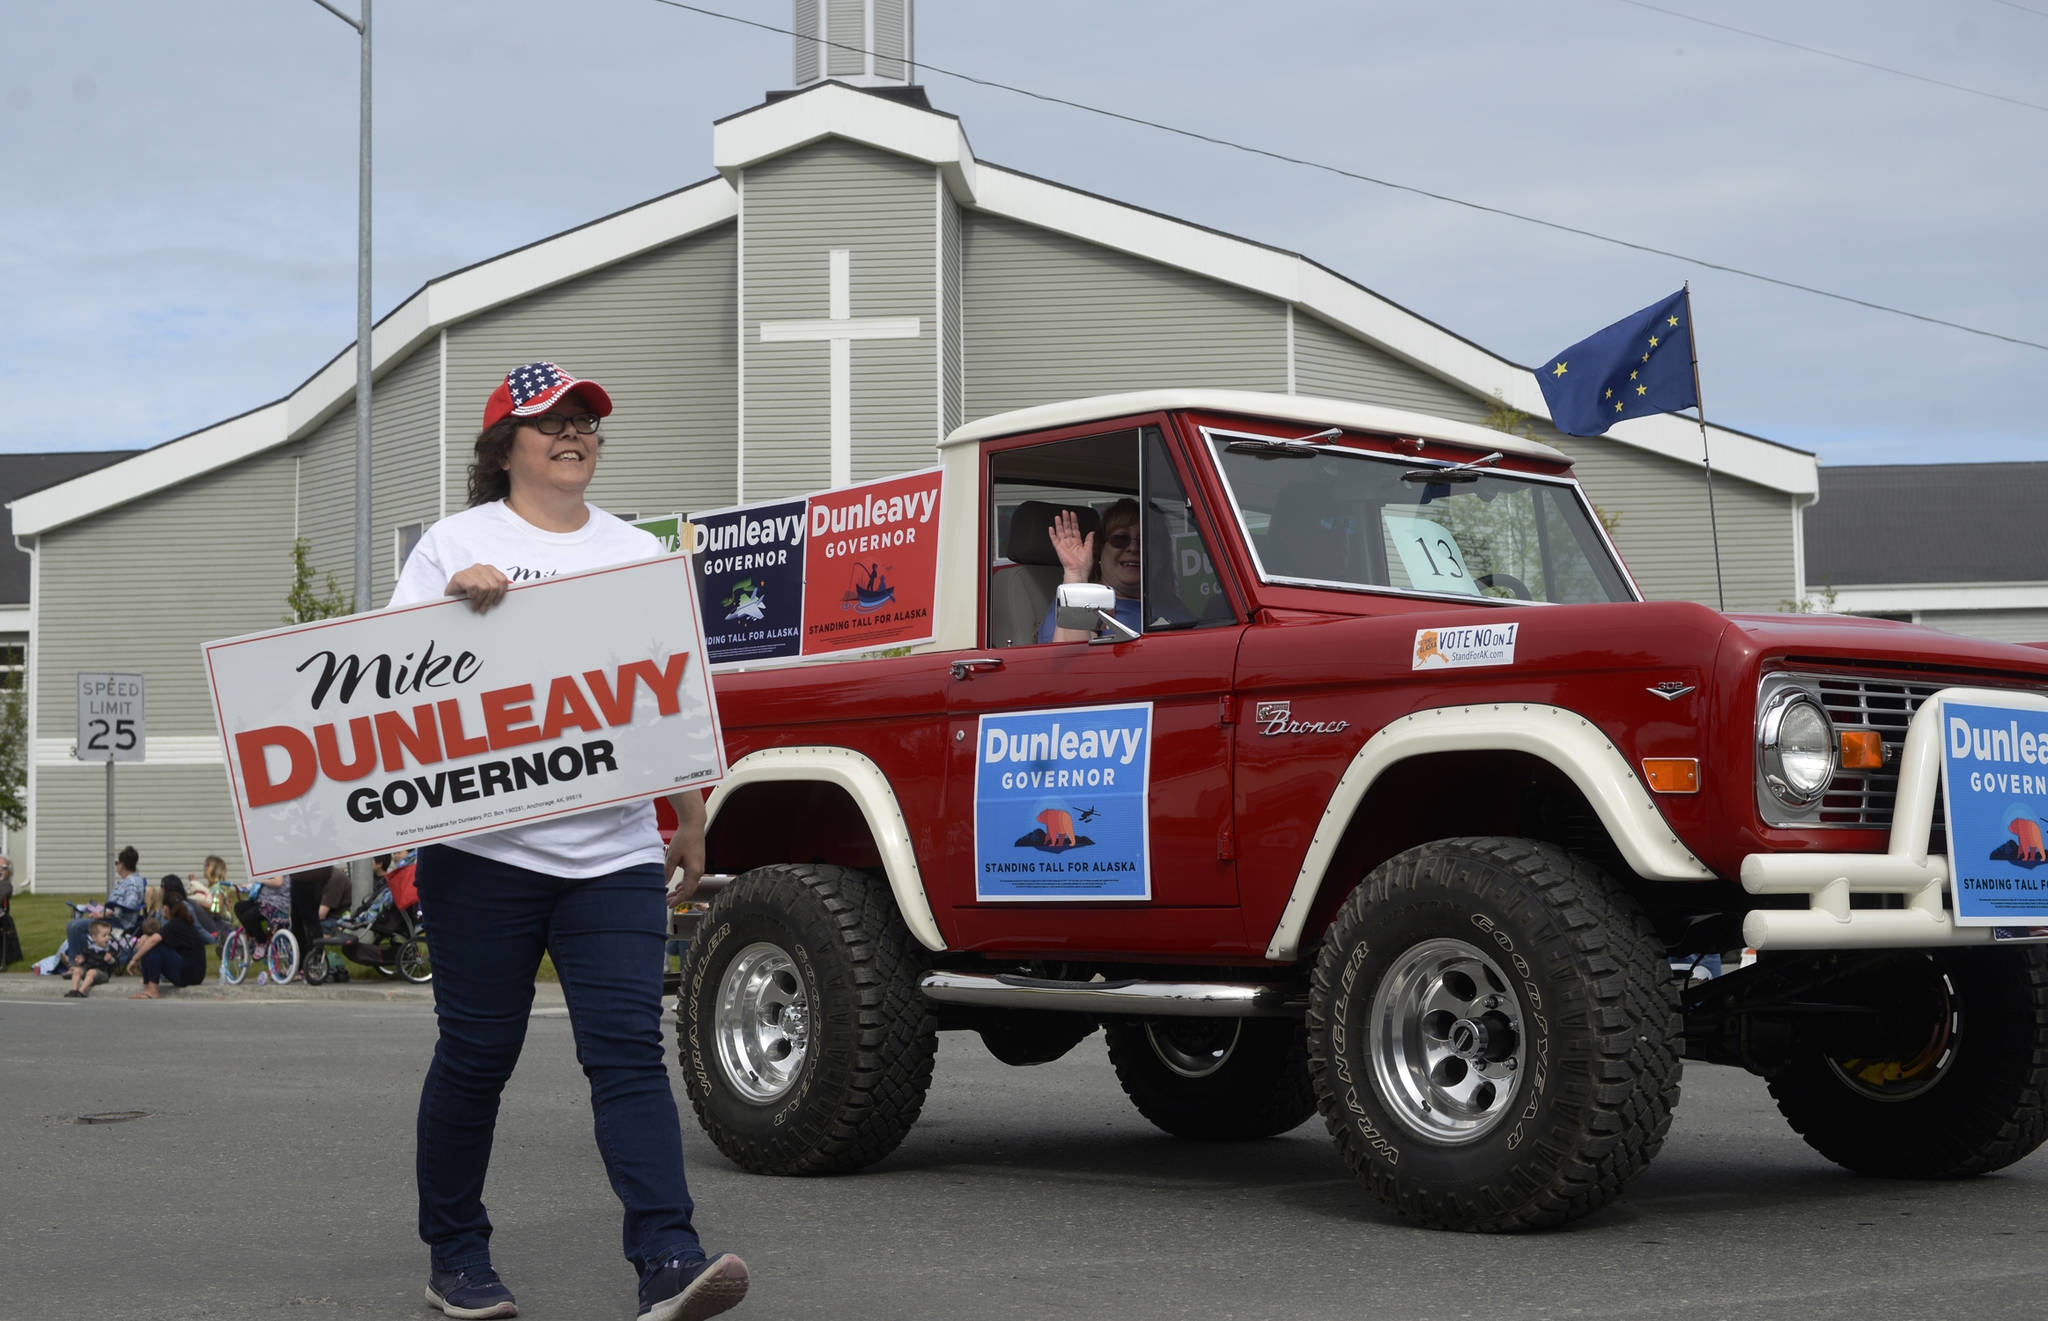 Volunteers for gubernatorial candidate Mike Dunleavy’s float in the Progress Days parade make their way down Marydale Avenue on Saturday, July 28, 2018 in Soldotna, Alaska. The parade kicks off the weekend-long event celebrating Soldotna’s history, with a market on Saturday and Sunday in Soldotna Creek Park and a concert Saturday night followed by a free community barbecue Sunday. (Photo by Elizabeth Earl/Peninsula Clarion)